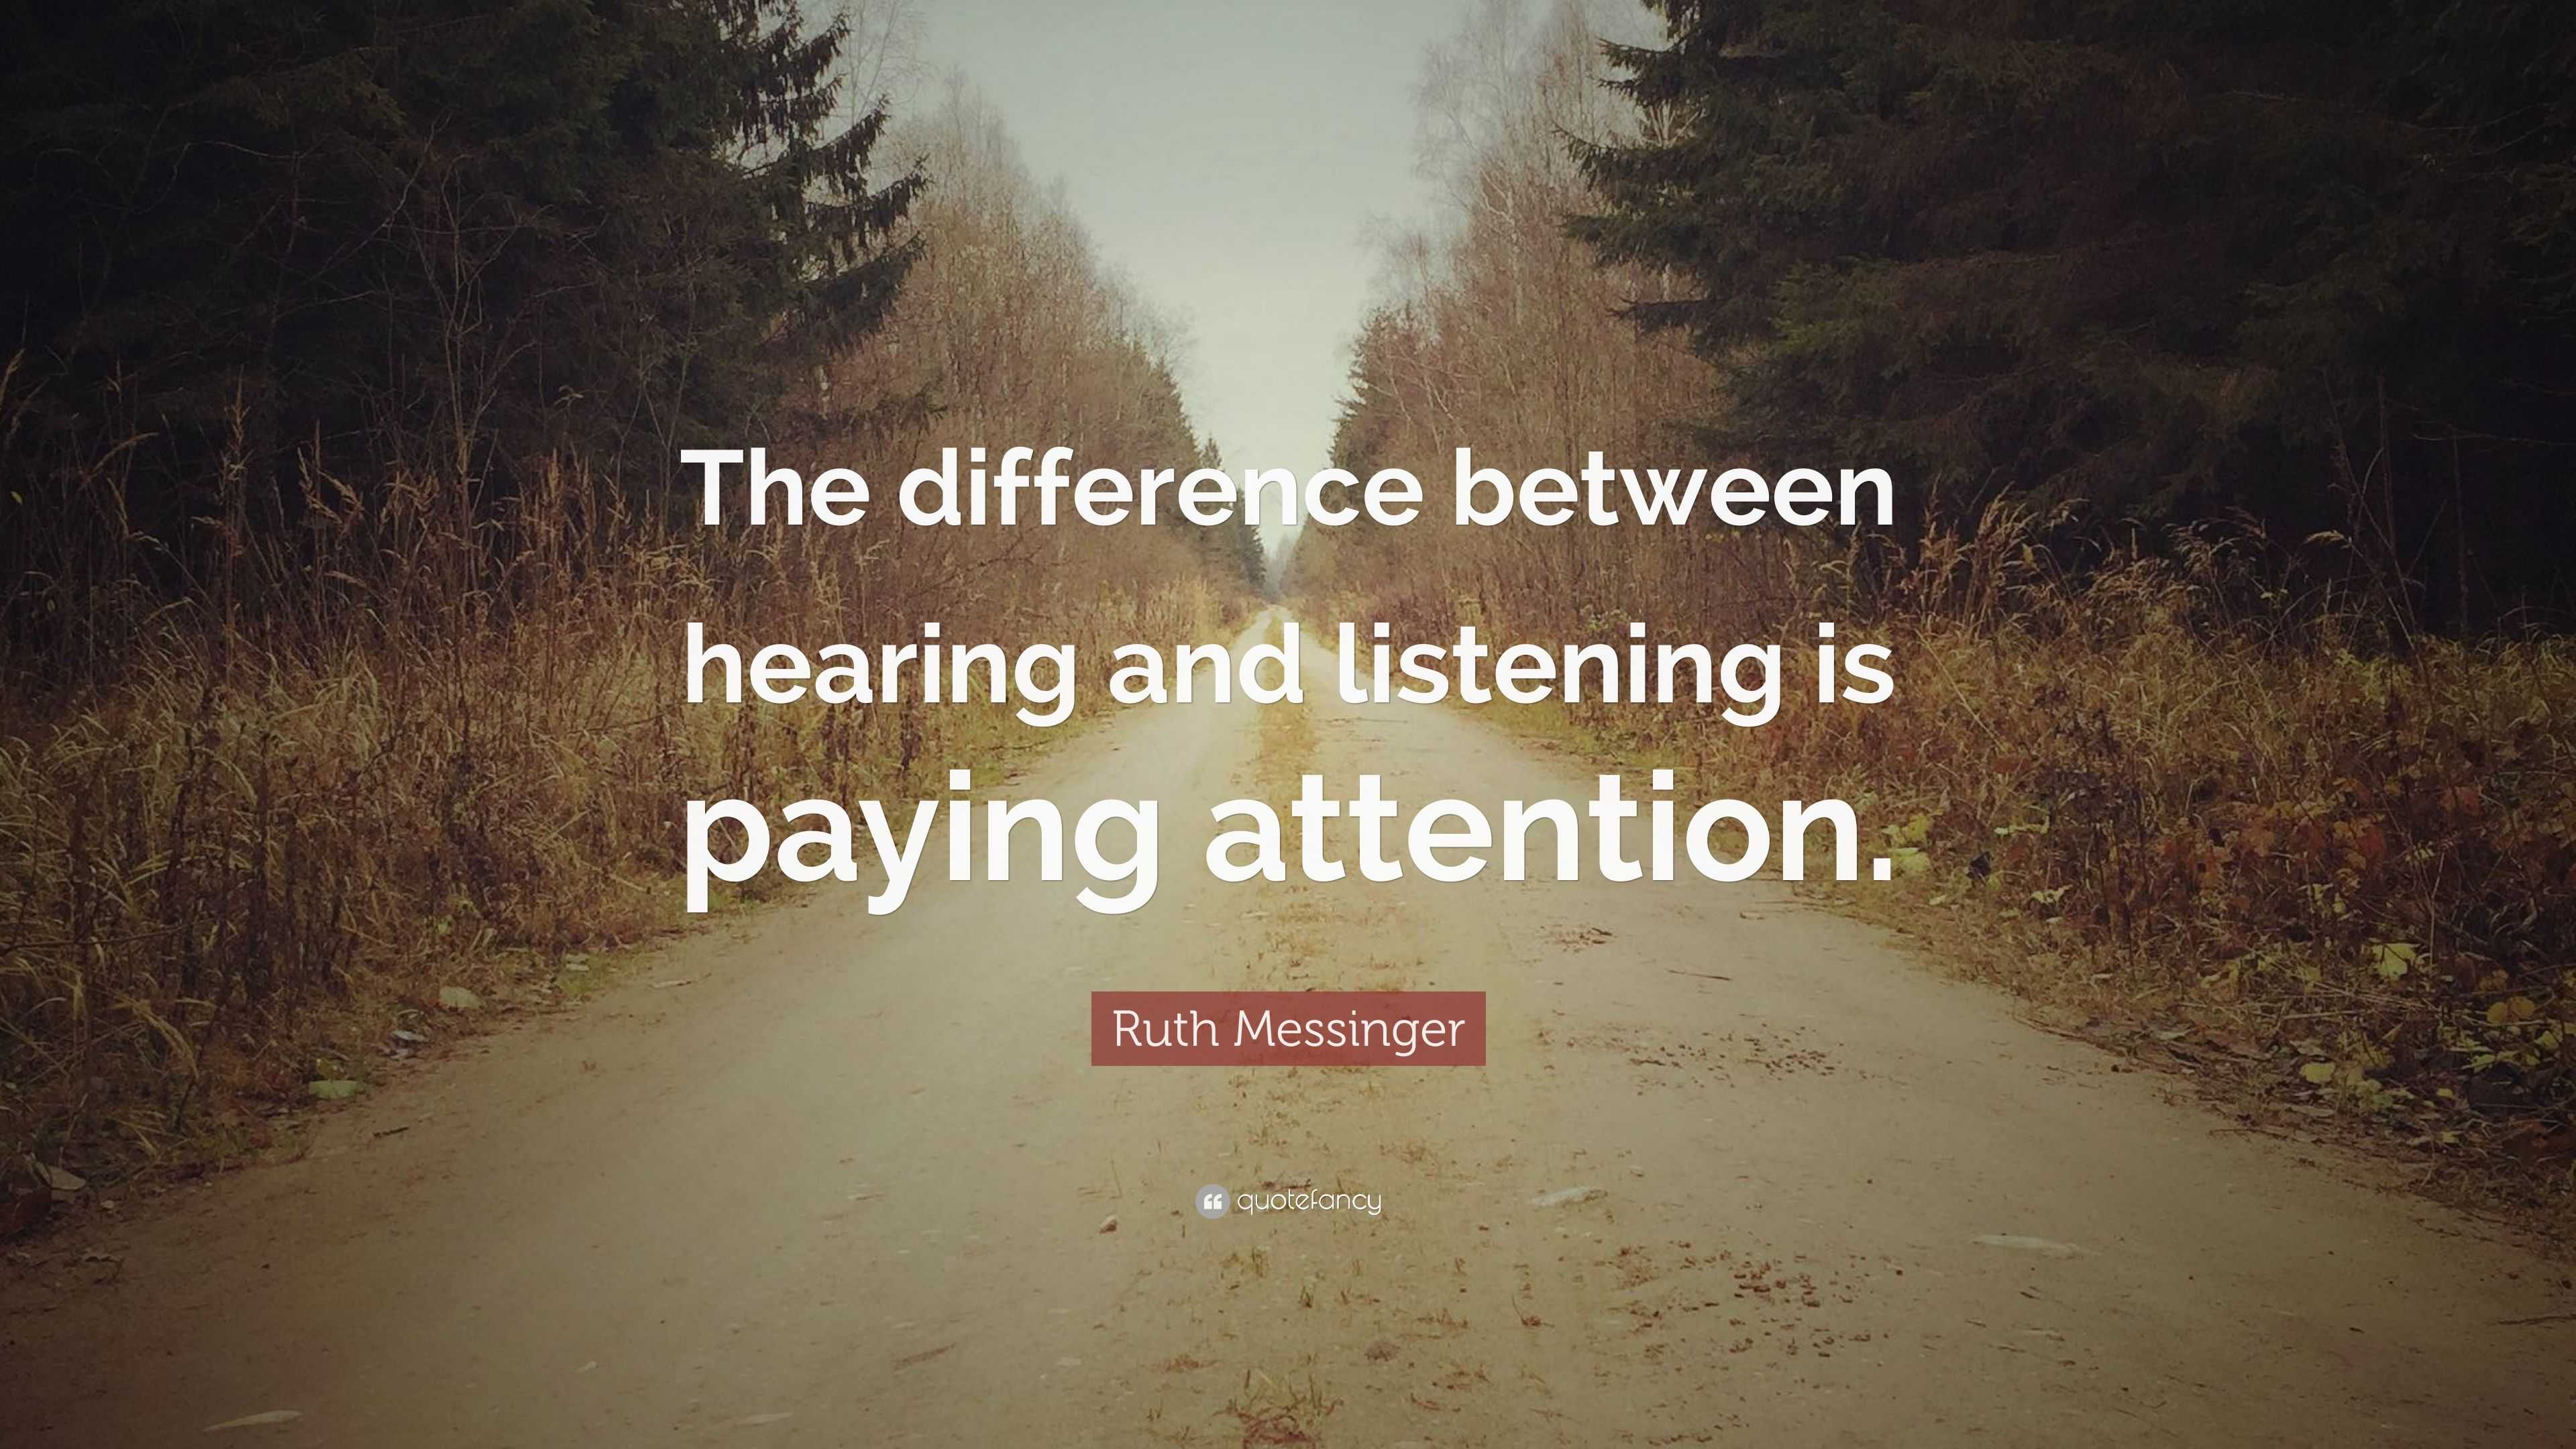 Ruth Messinger Quote: “The difference between hearing and listening is